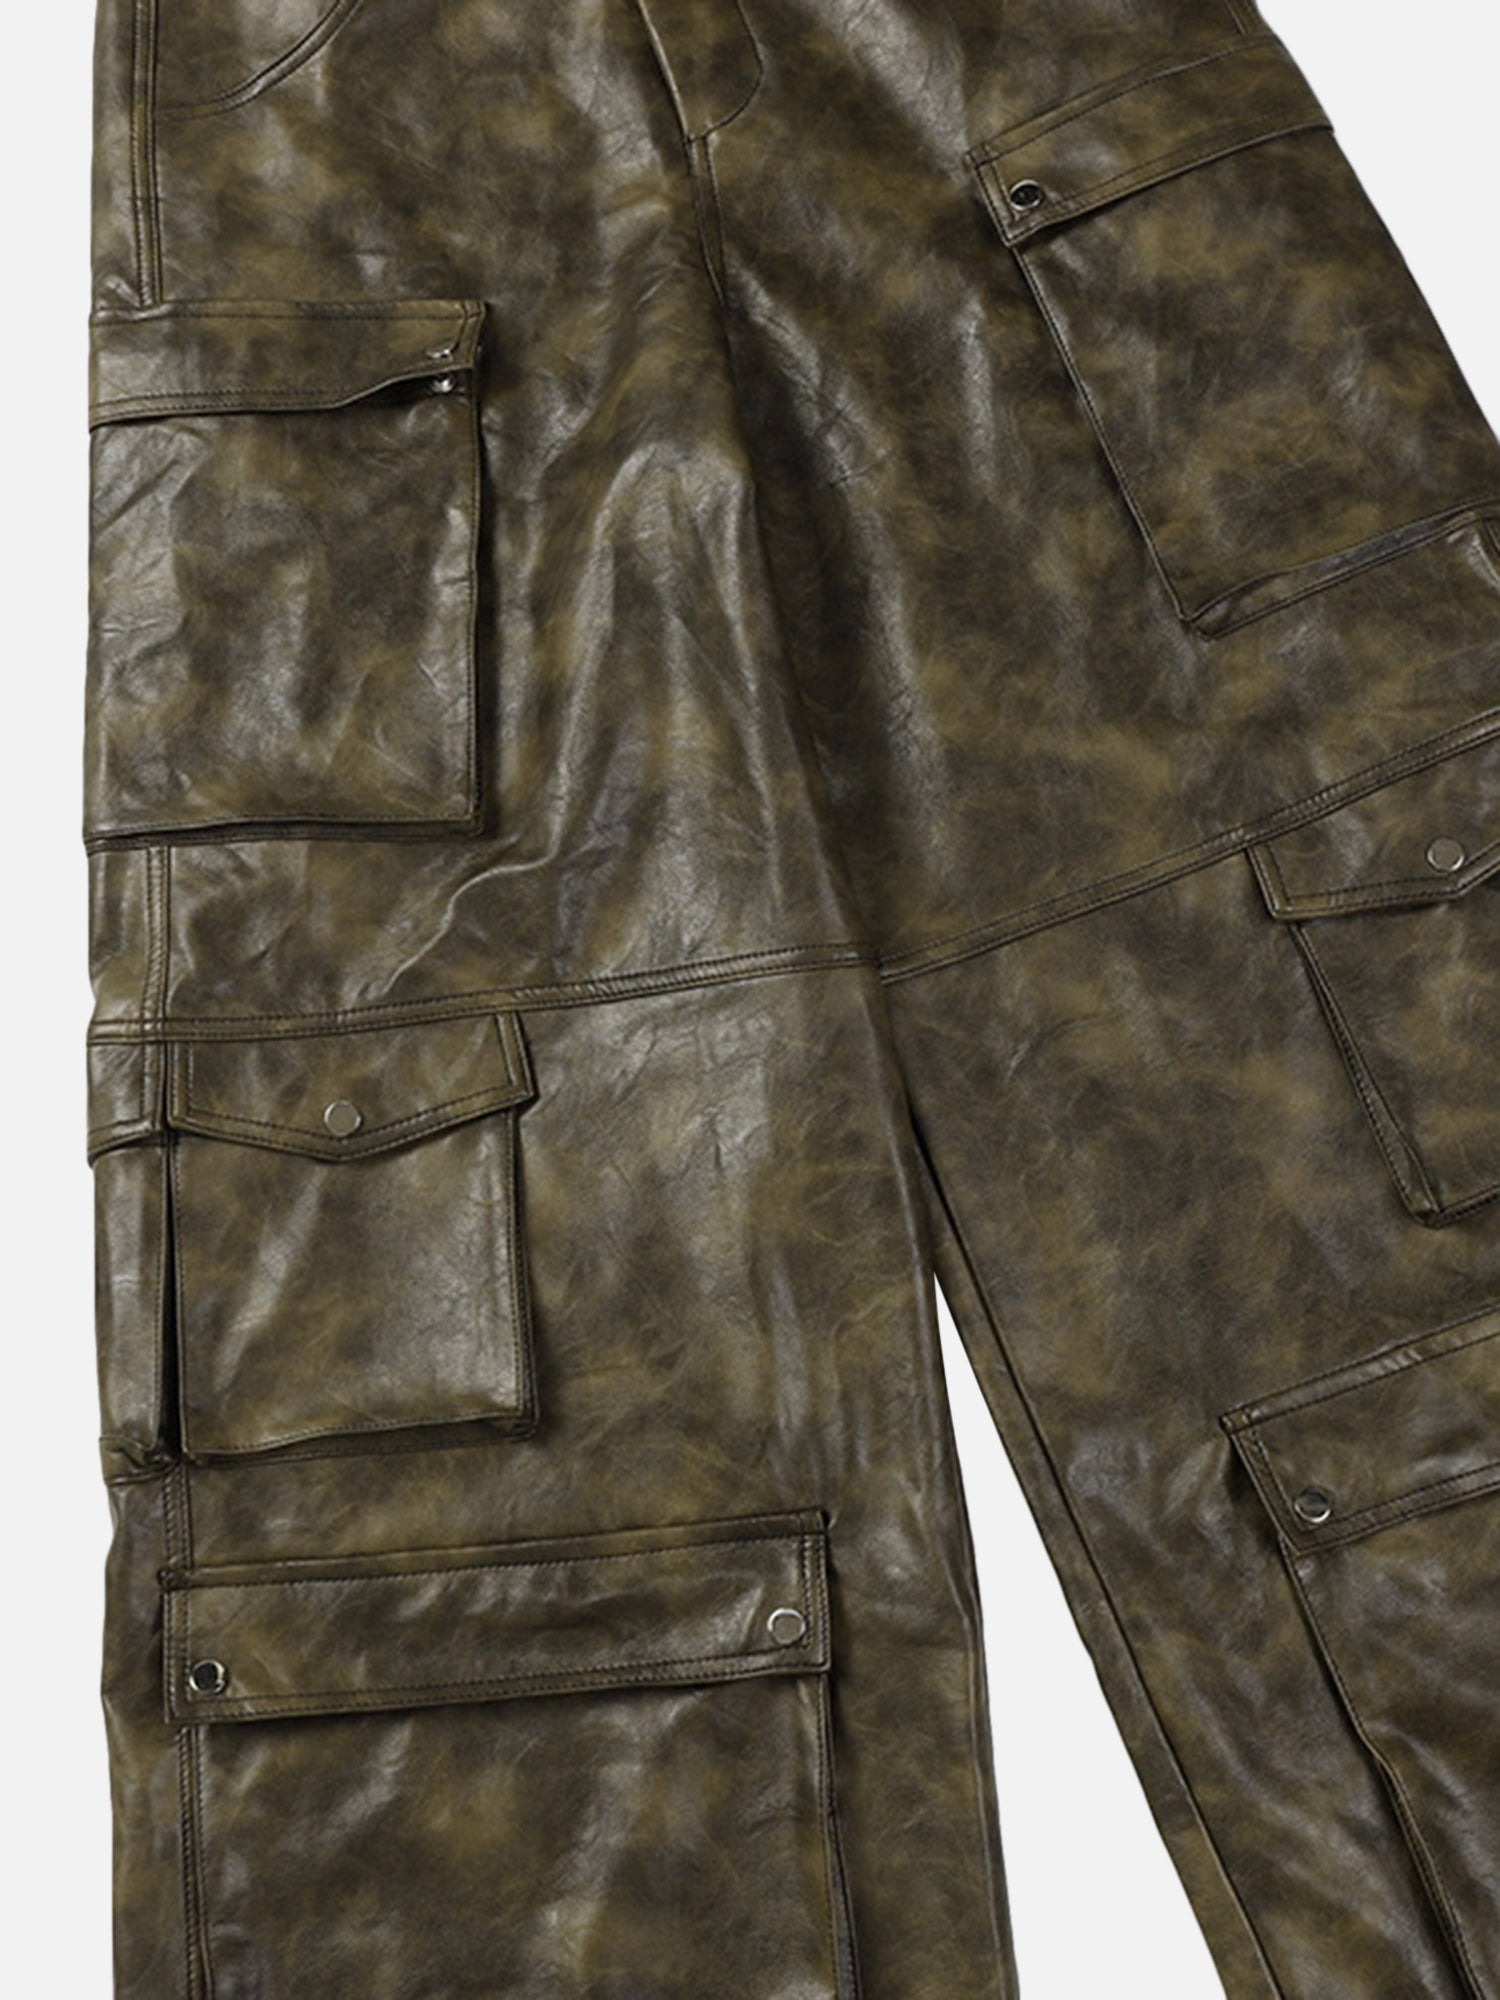 Thesupermade Hip-hop High Street Multi-pocket Leather Cargo Pants